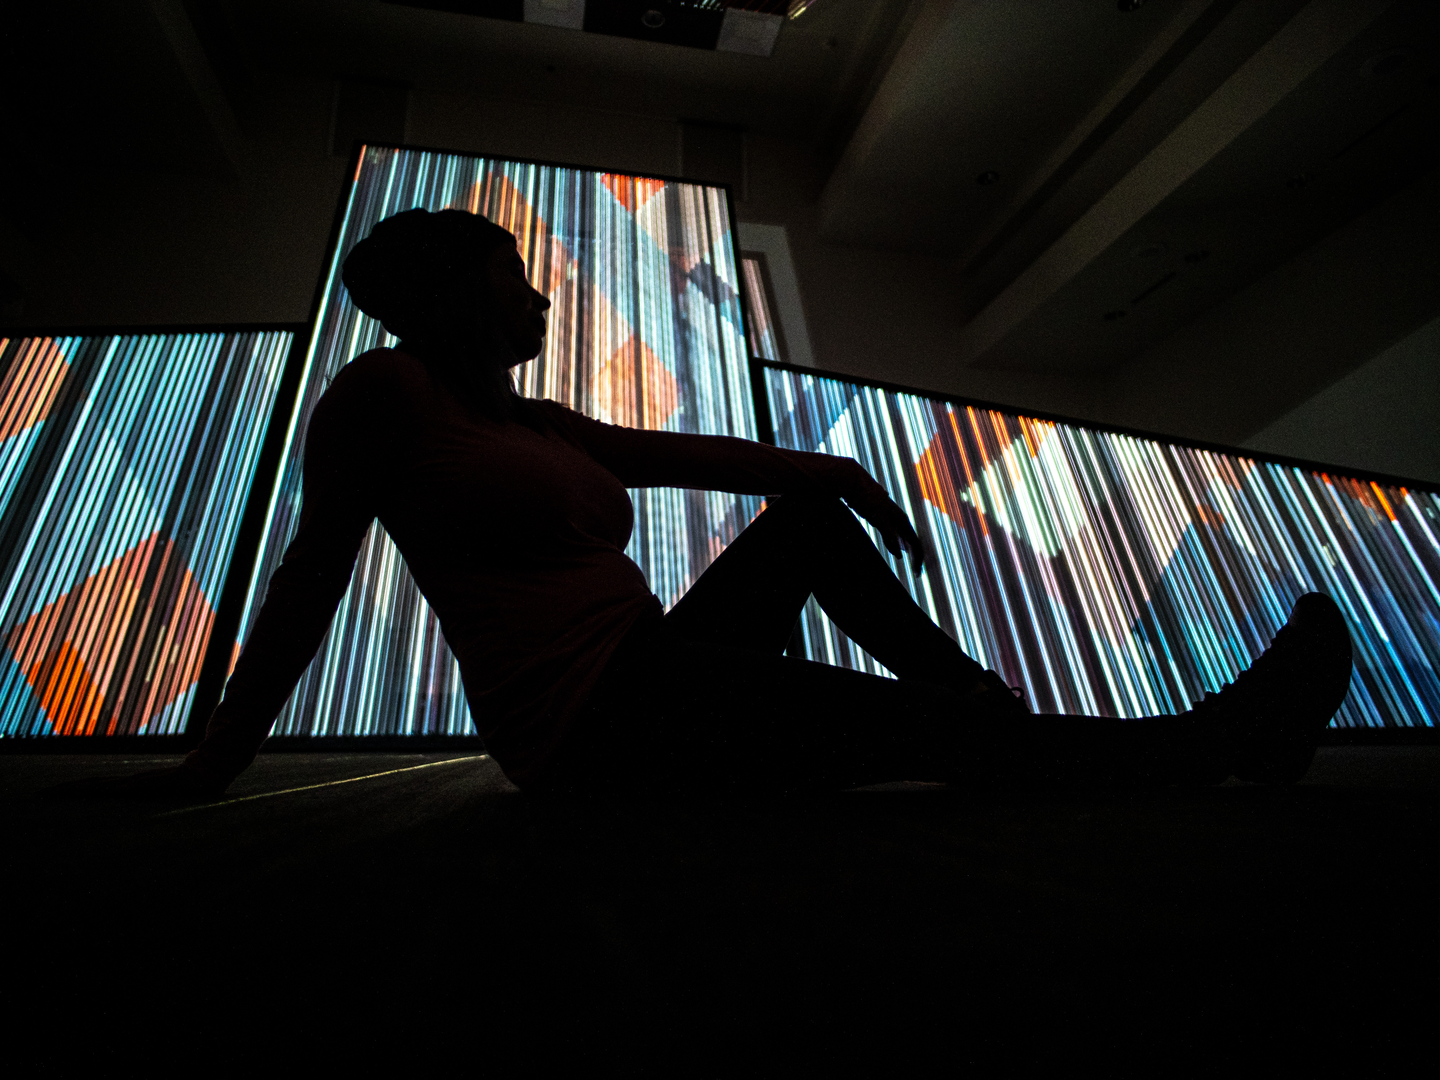 SXSW Art Program Presents Weaving by Cocolab – Photo by Caleb Pickens